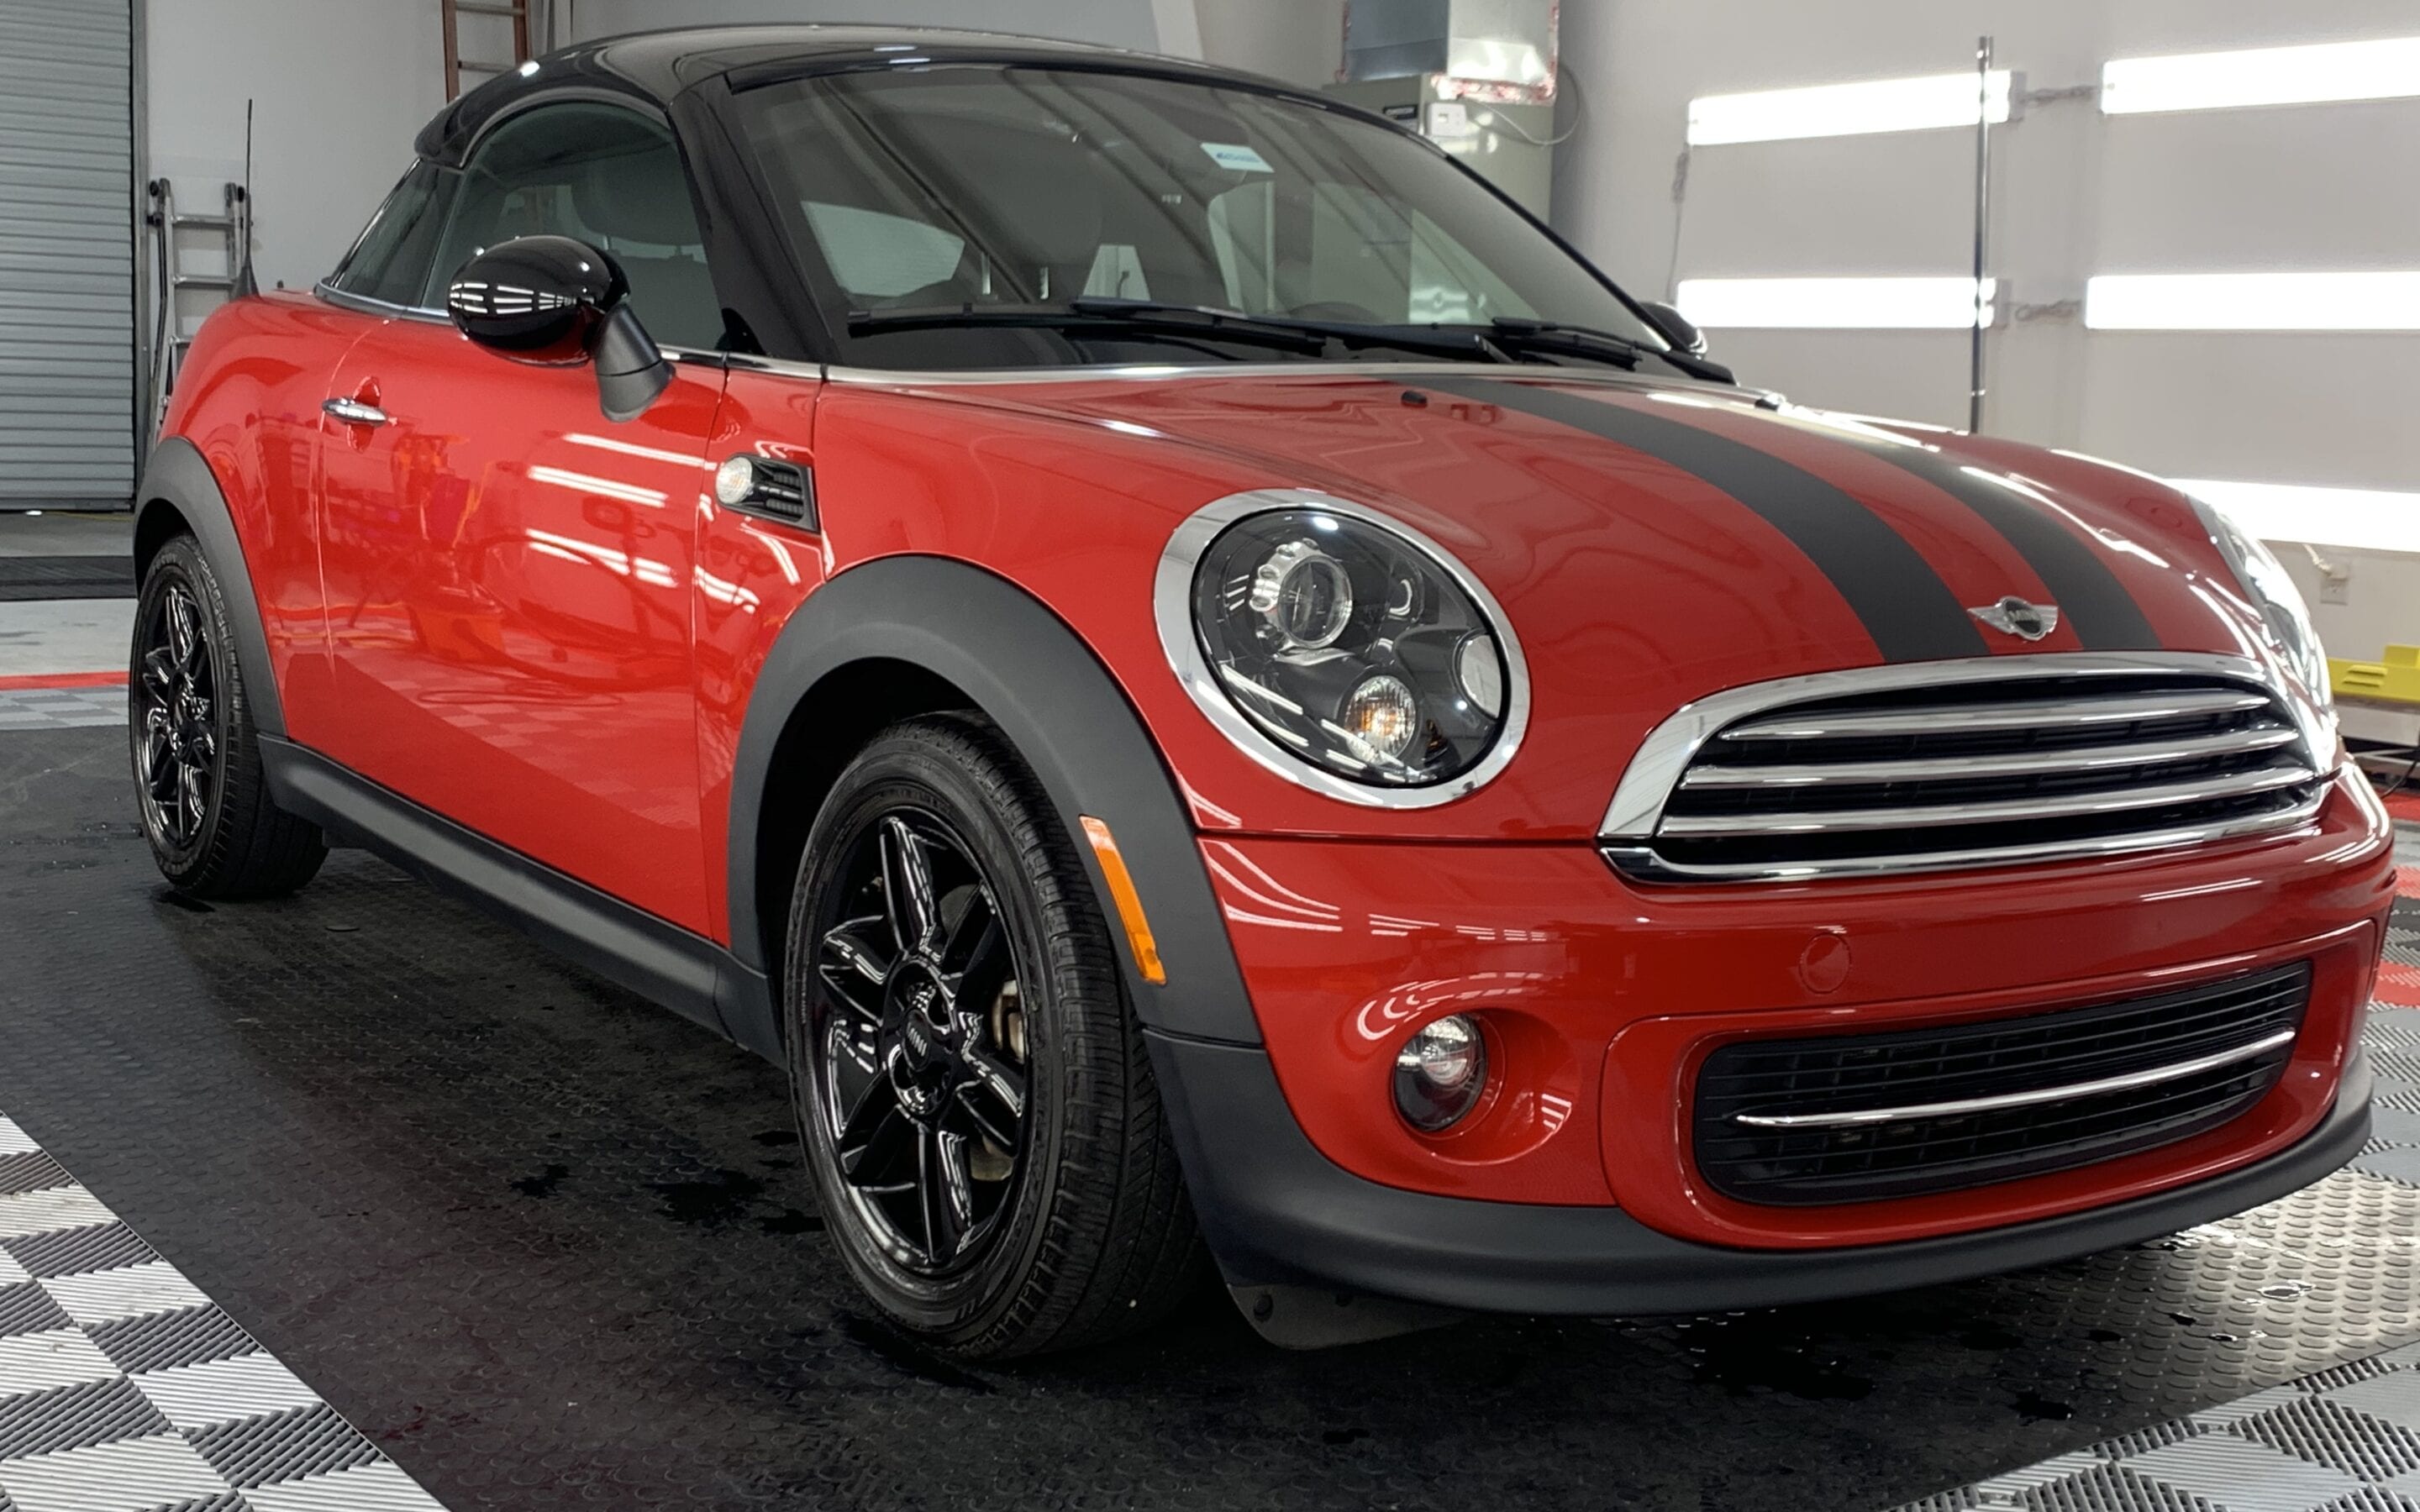 Full Detail of a 2012 MINI Coupe